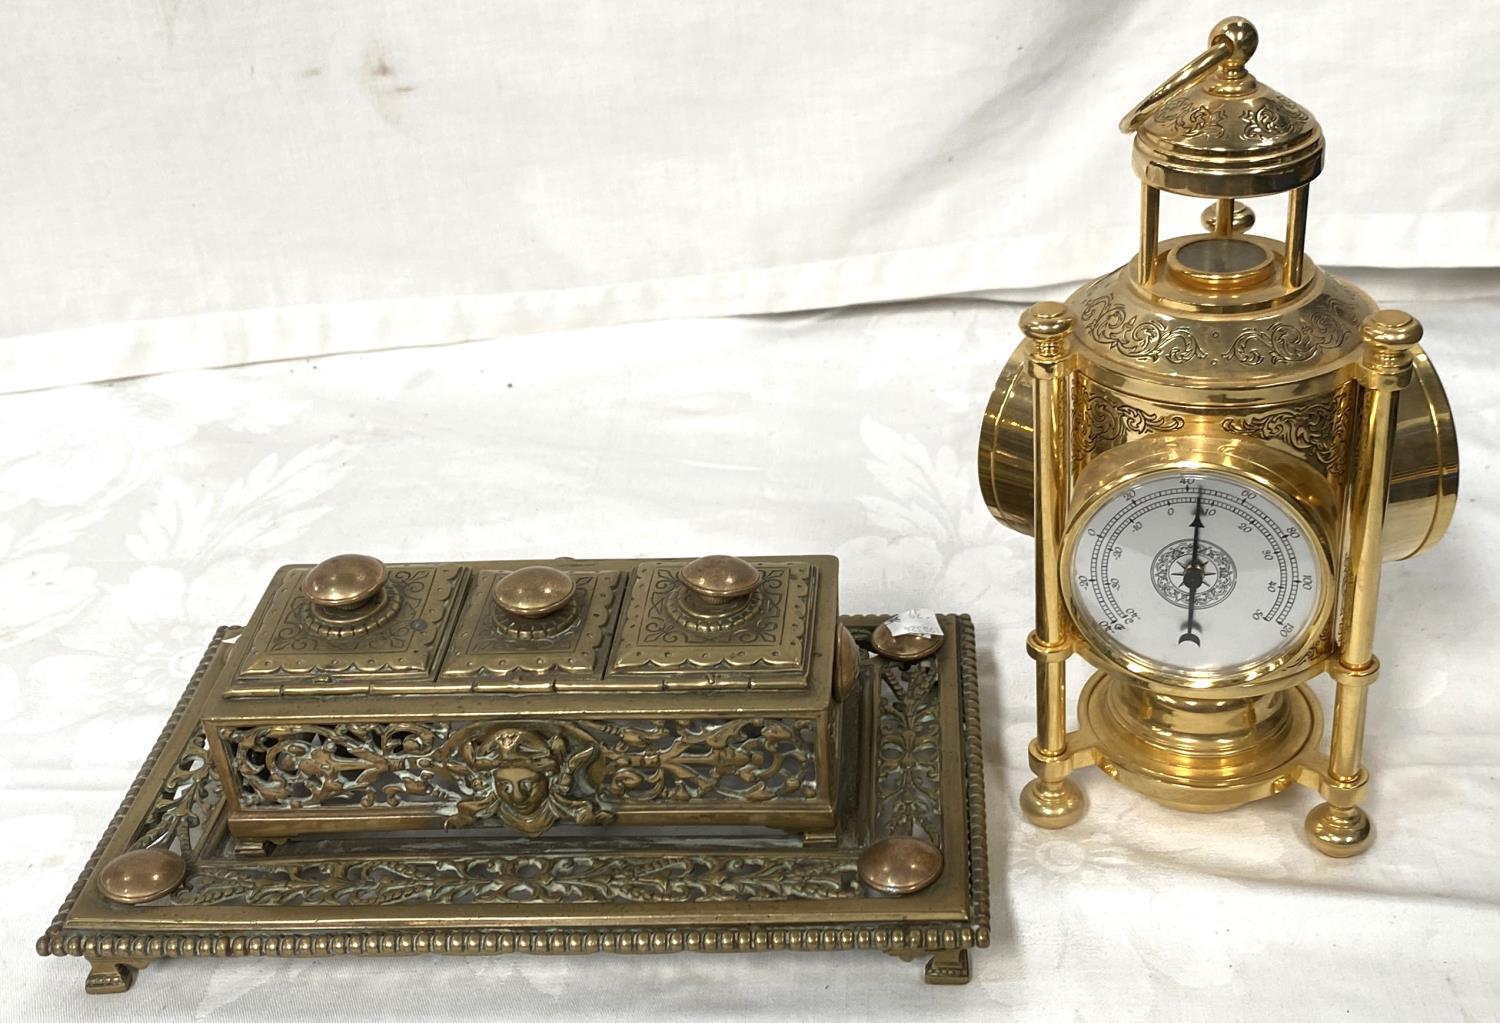 A reproduction brass meteorological clock with three faces and a brass 19th century inkwell with